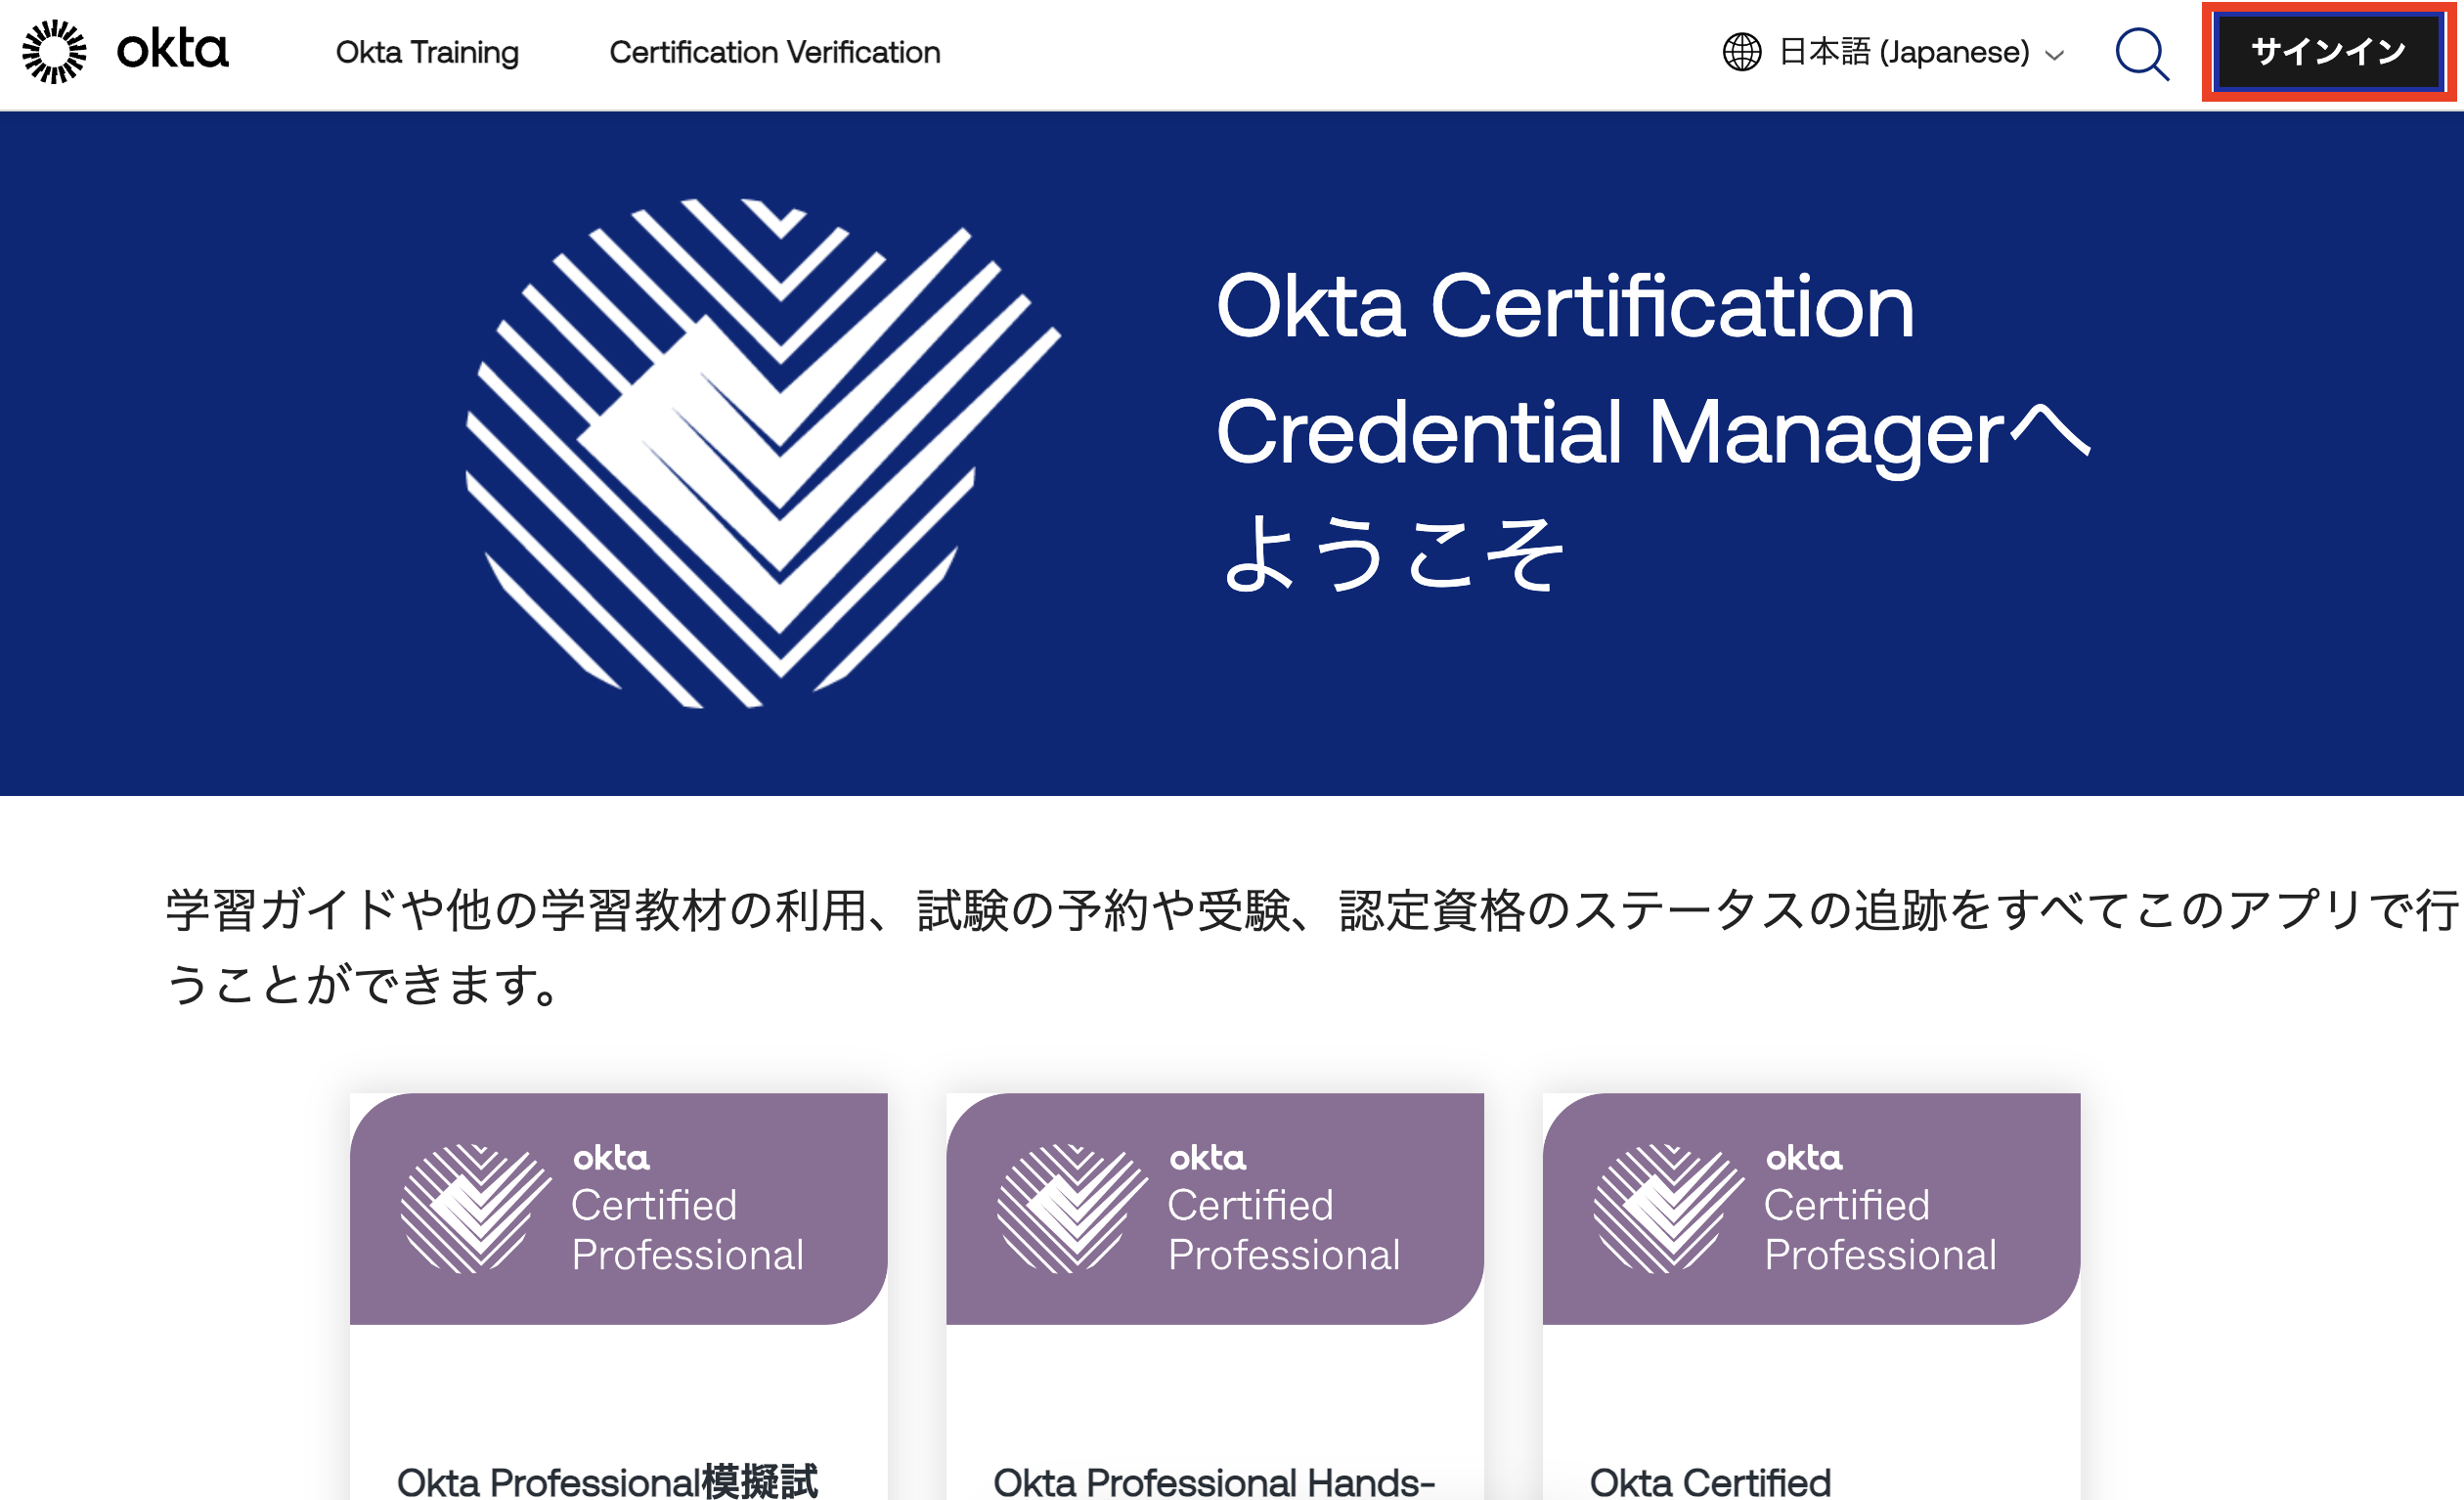 Image of a webpage for Okta Certification Credential Manager hovering over the Sign In call to action.